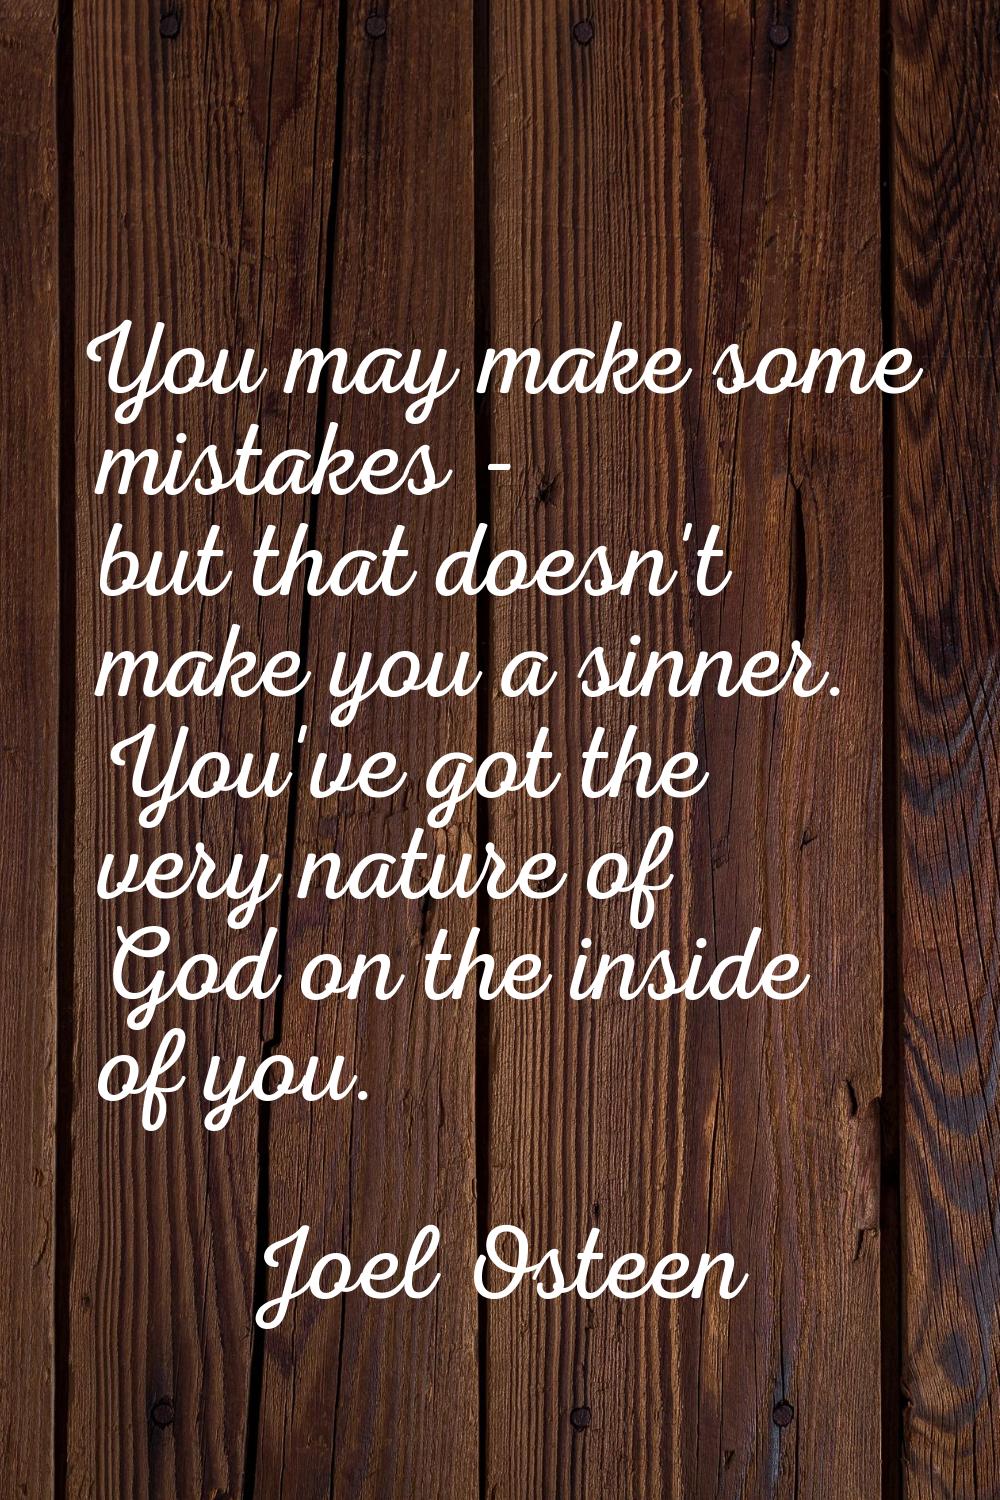 You may make some mistakes - but that doesn't make you a sinner. You've got the very nature of God 